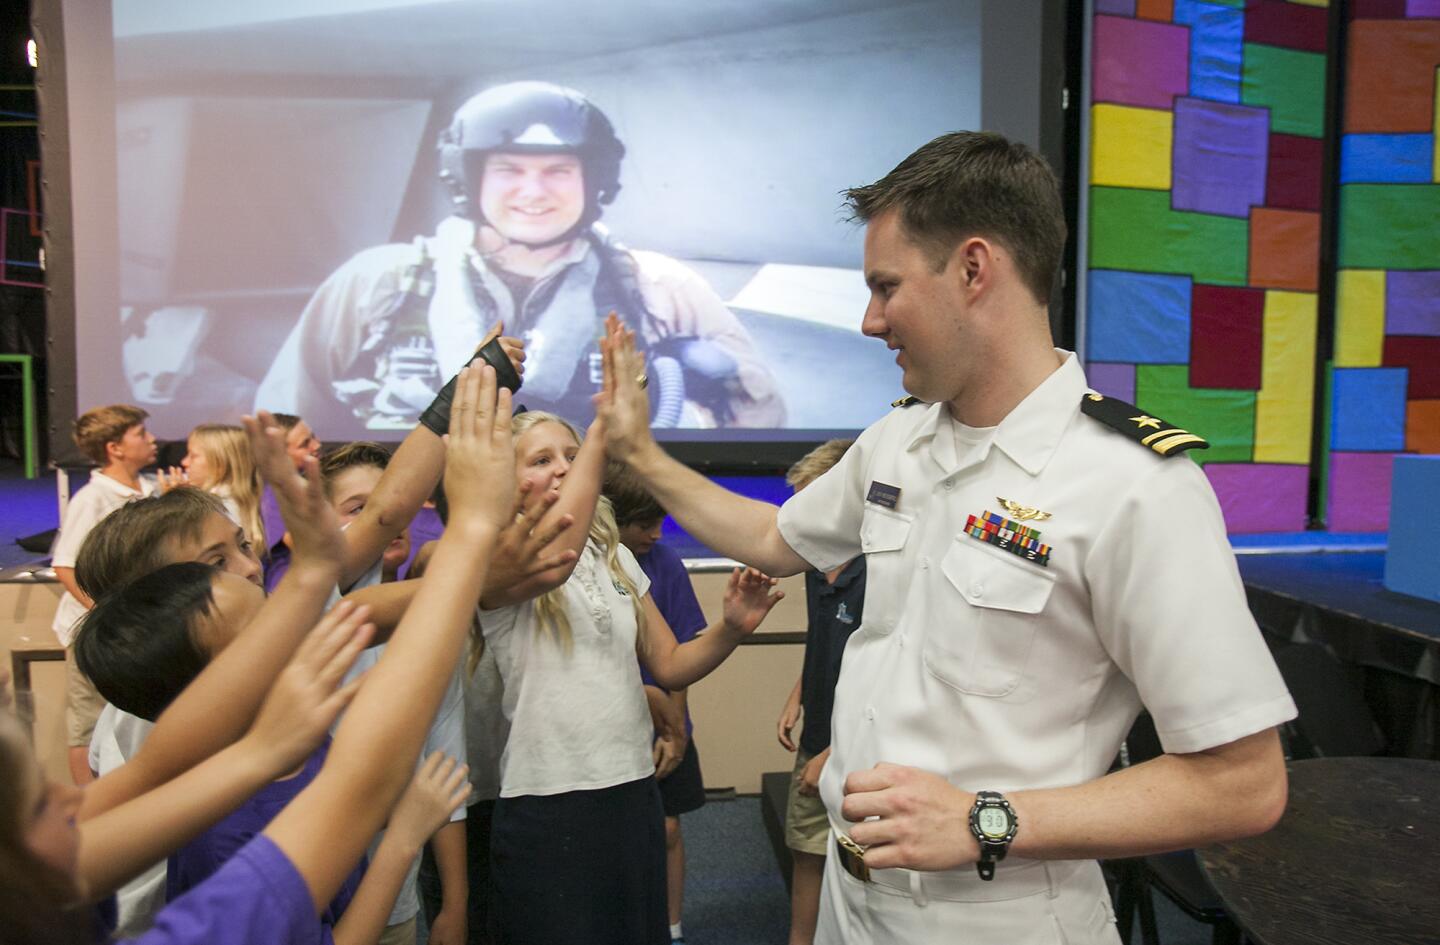 Lt. j. g. Jon Weissberg, a weapons system operator in the U.S. Navy, and alumni of Mariners Christian School, high fives students at the school on Friday, May 16. (Scott Smeltzer - Daily Pilot)